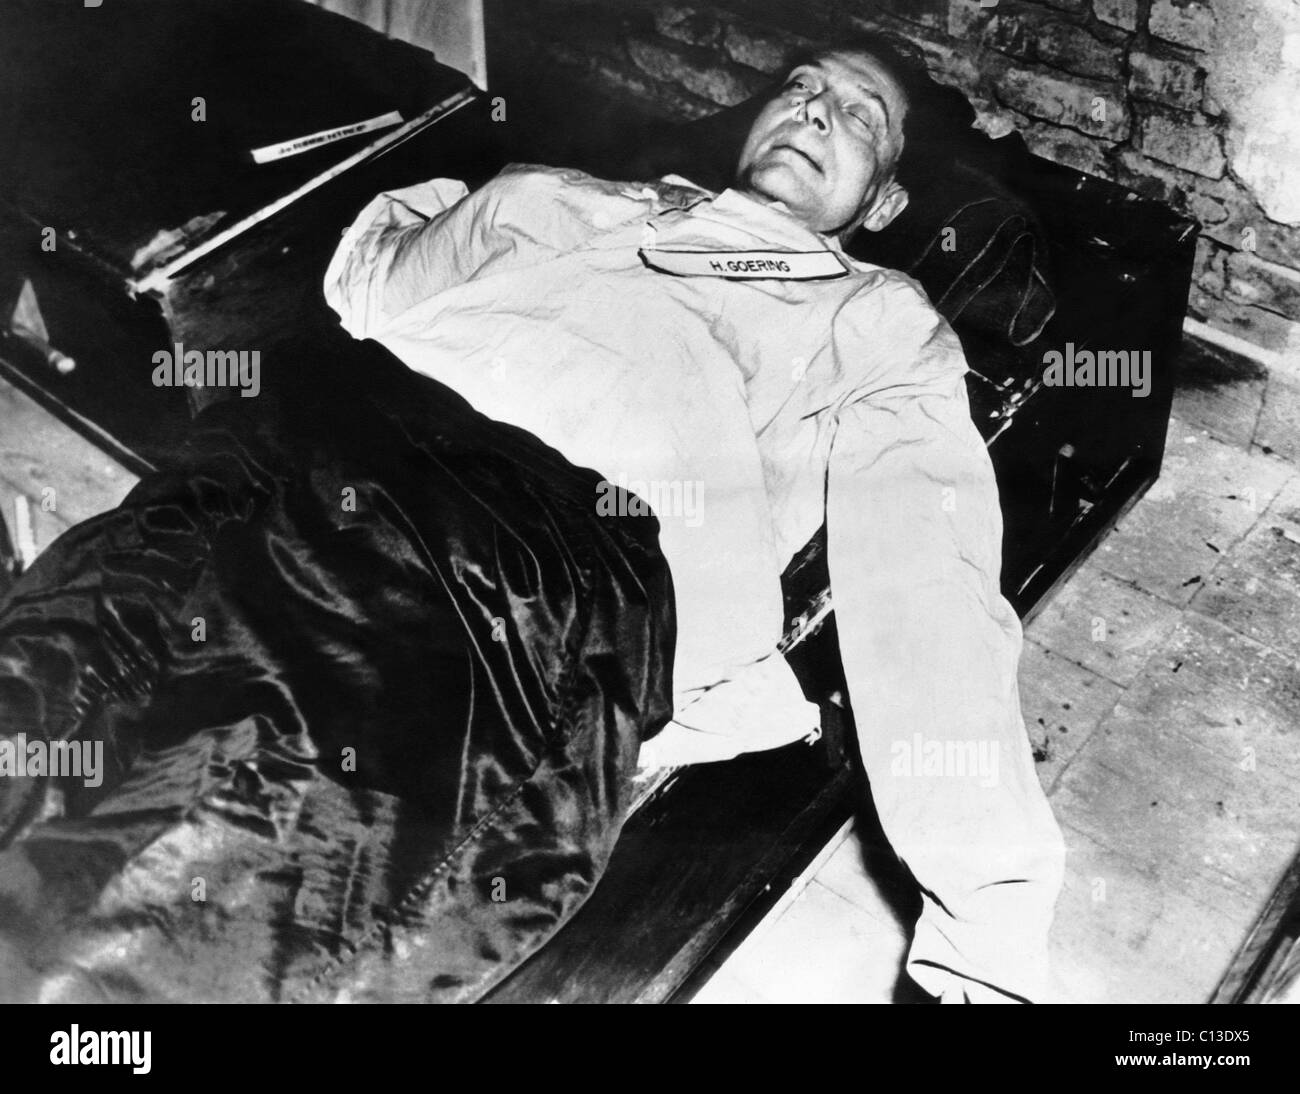 Commander-in-chief of the Luftwaffe Hermann Goering, after his suicide in prison, October 15, 1946 Stock Photo